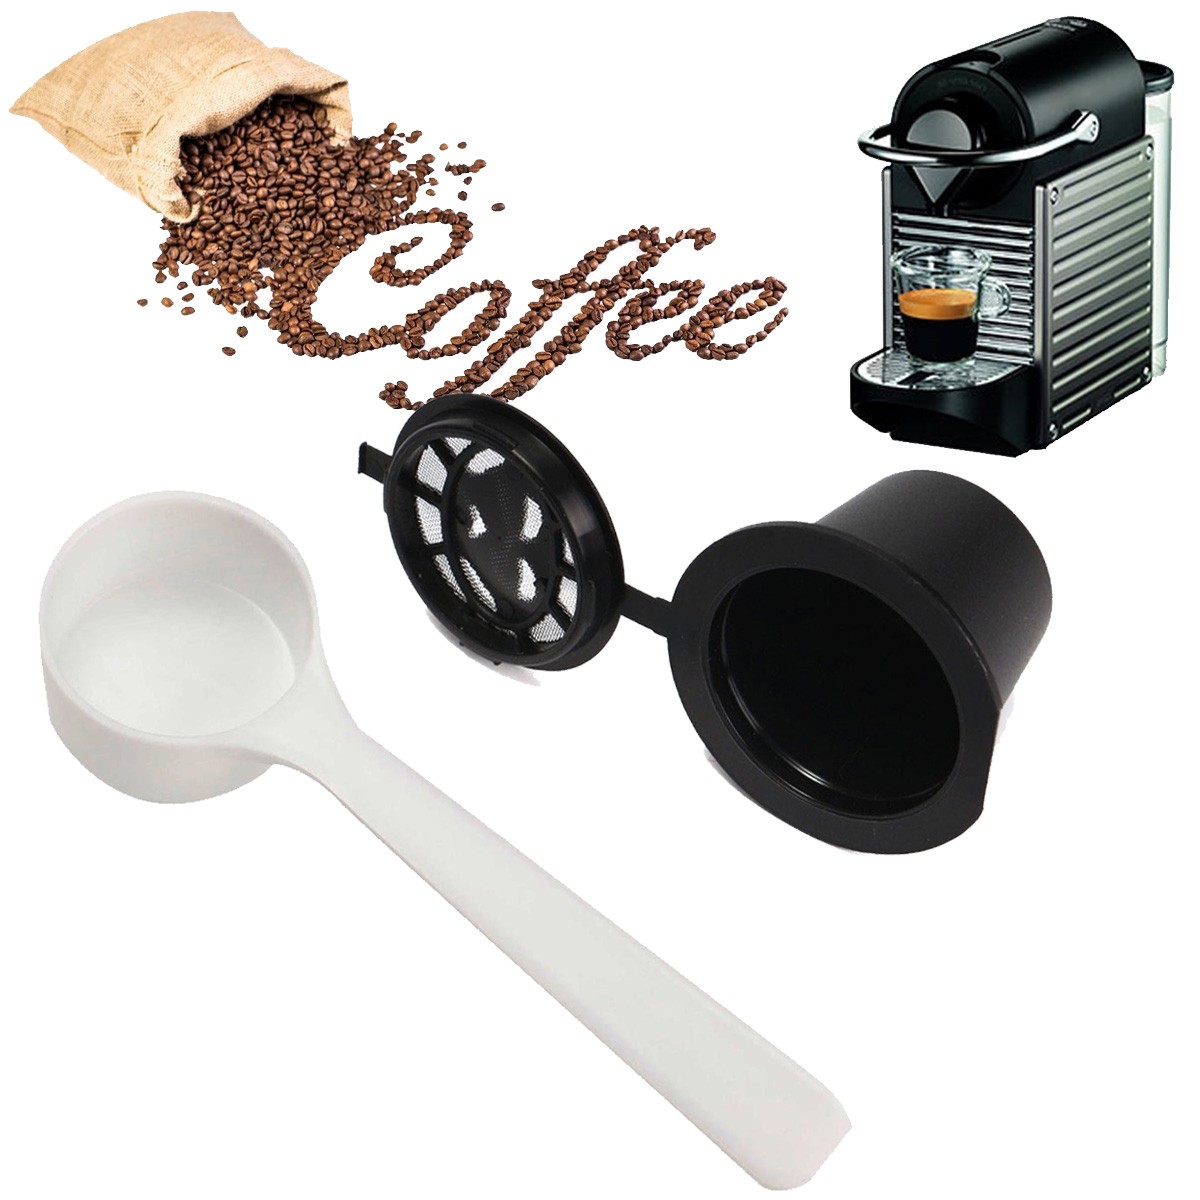 Refillable-Reusable-Coffee-Capsule-Pods-Cup-for-Nespresso-Machine-1268145